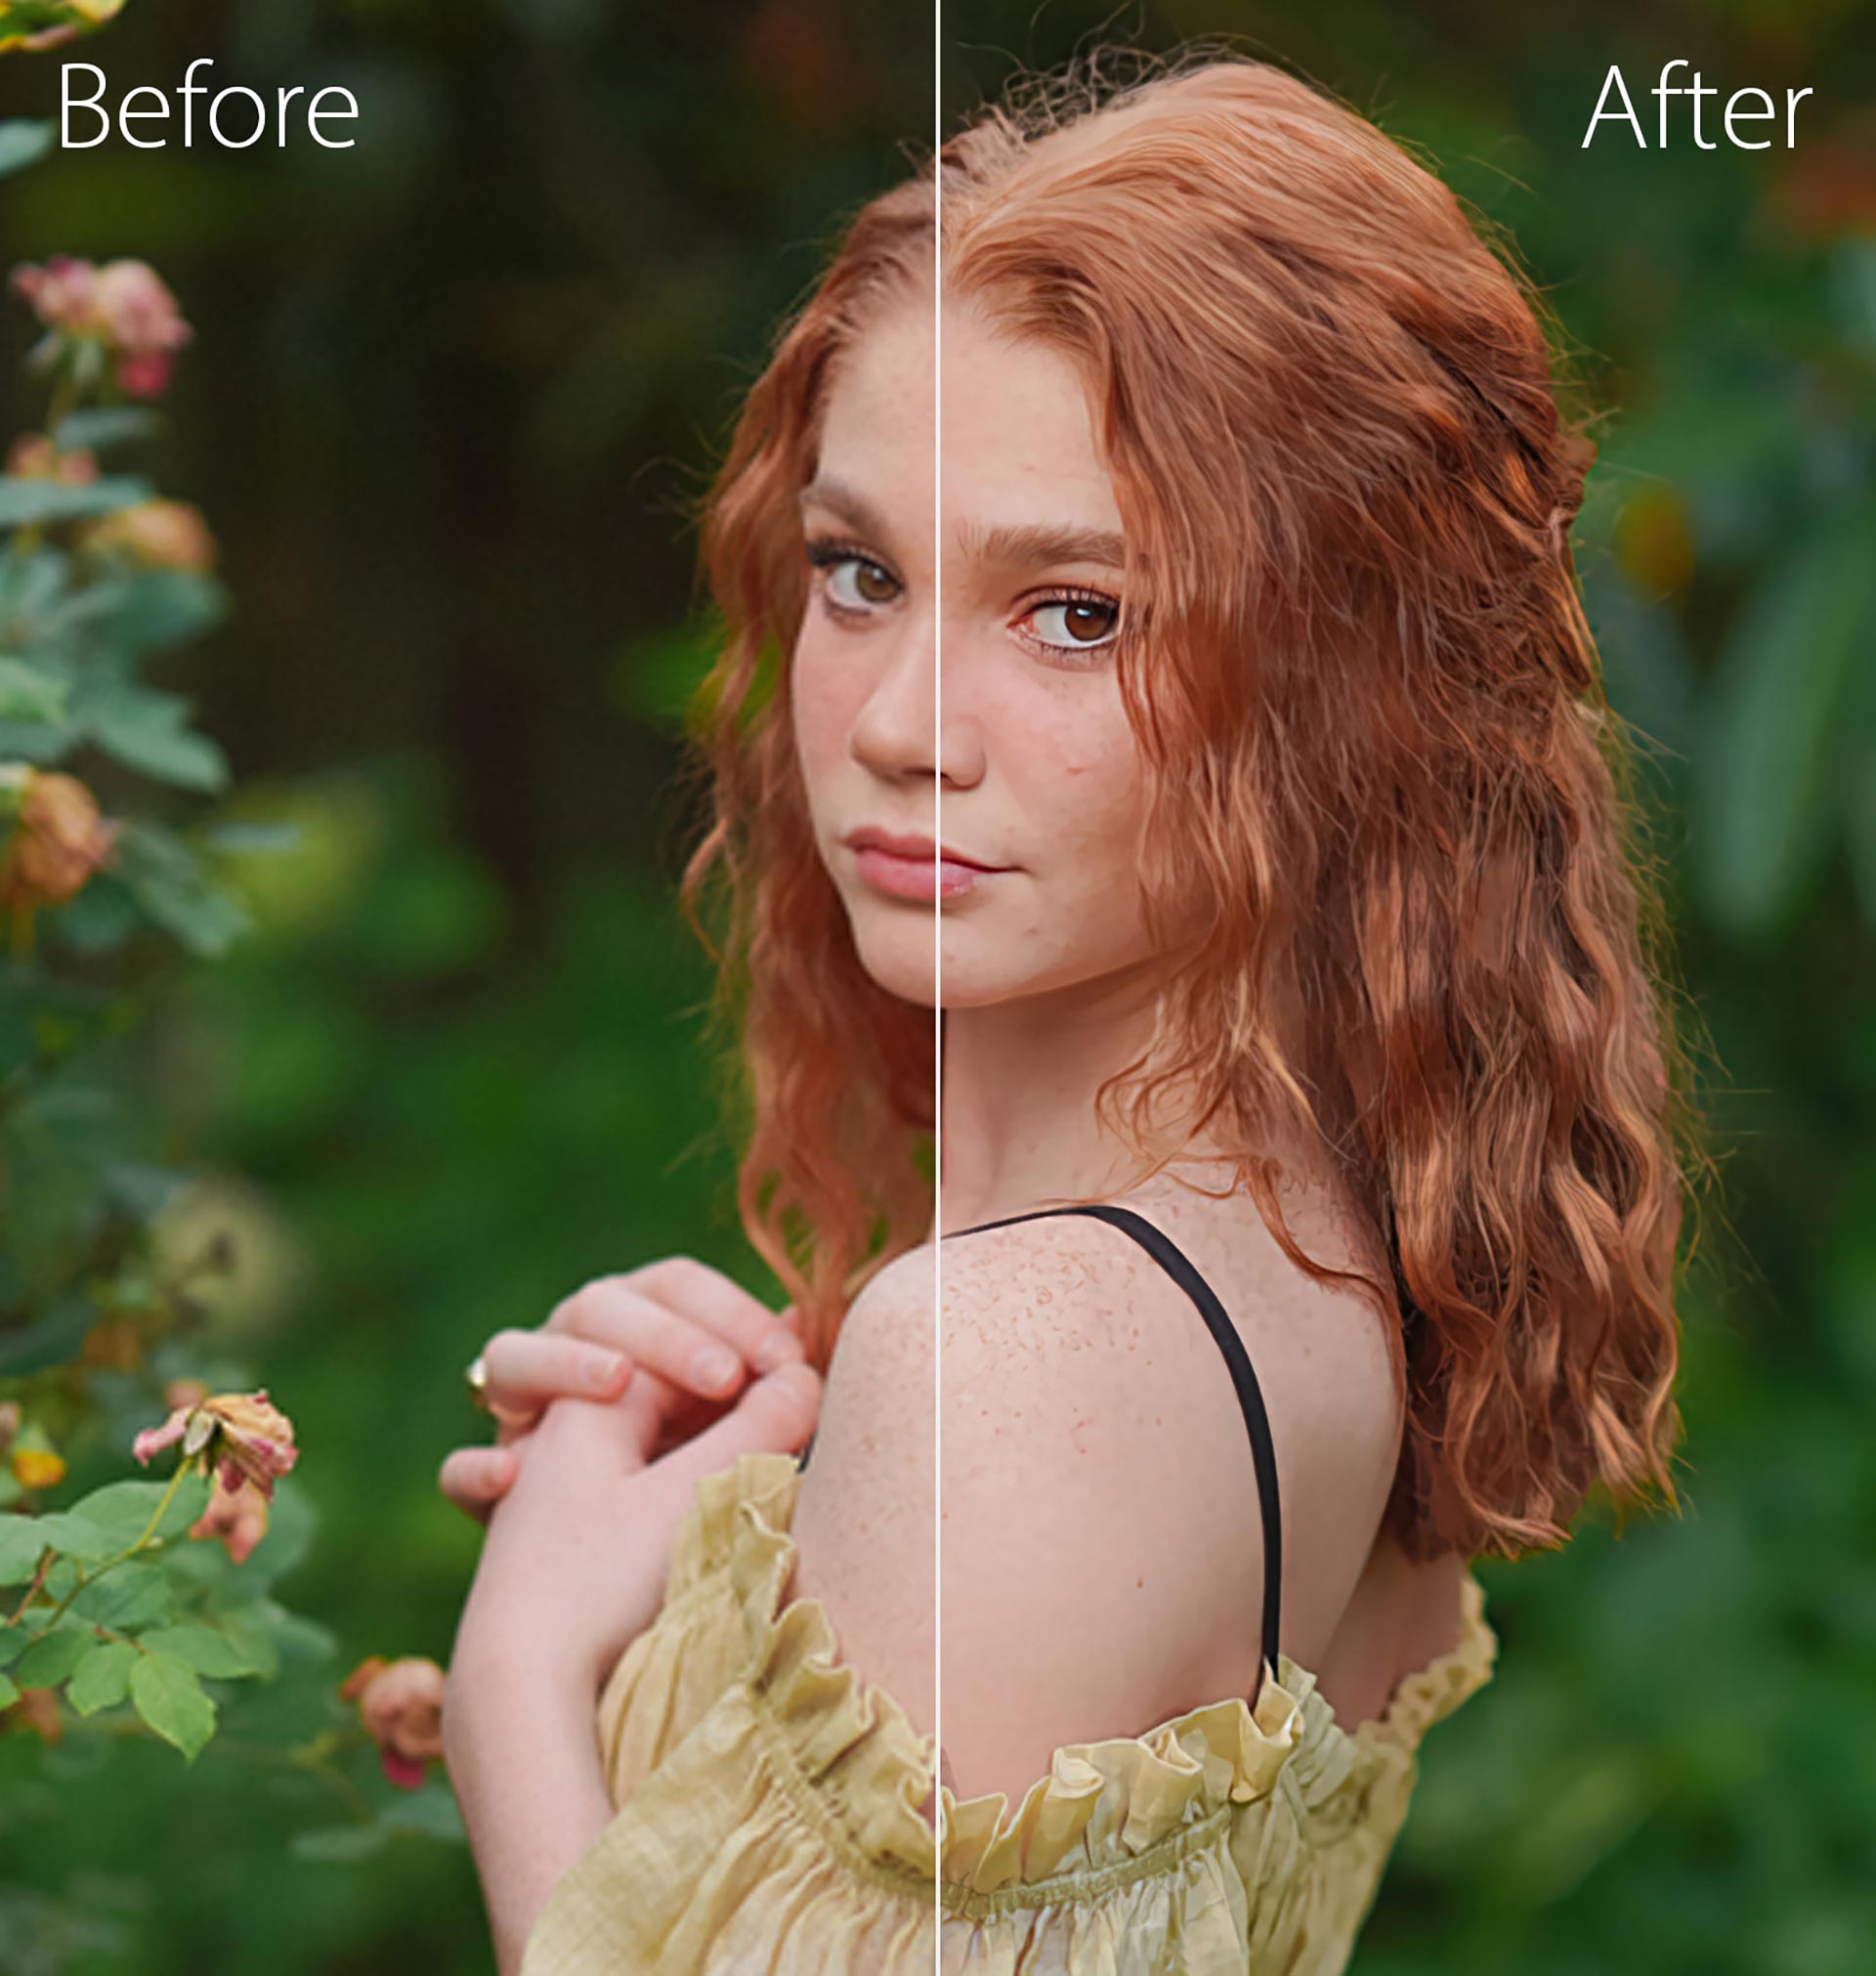 Leon Johnson Image Before and After Resolution Optimization